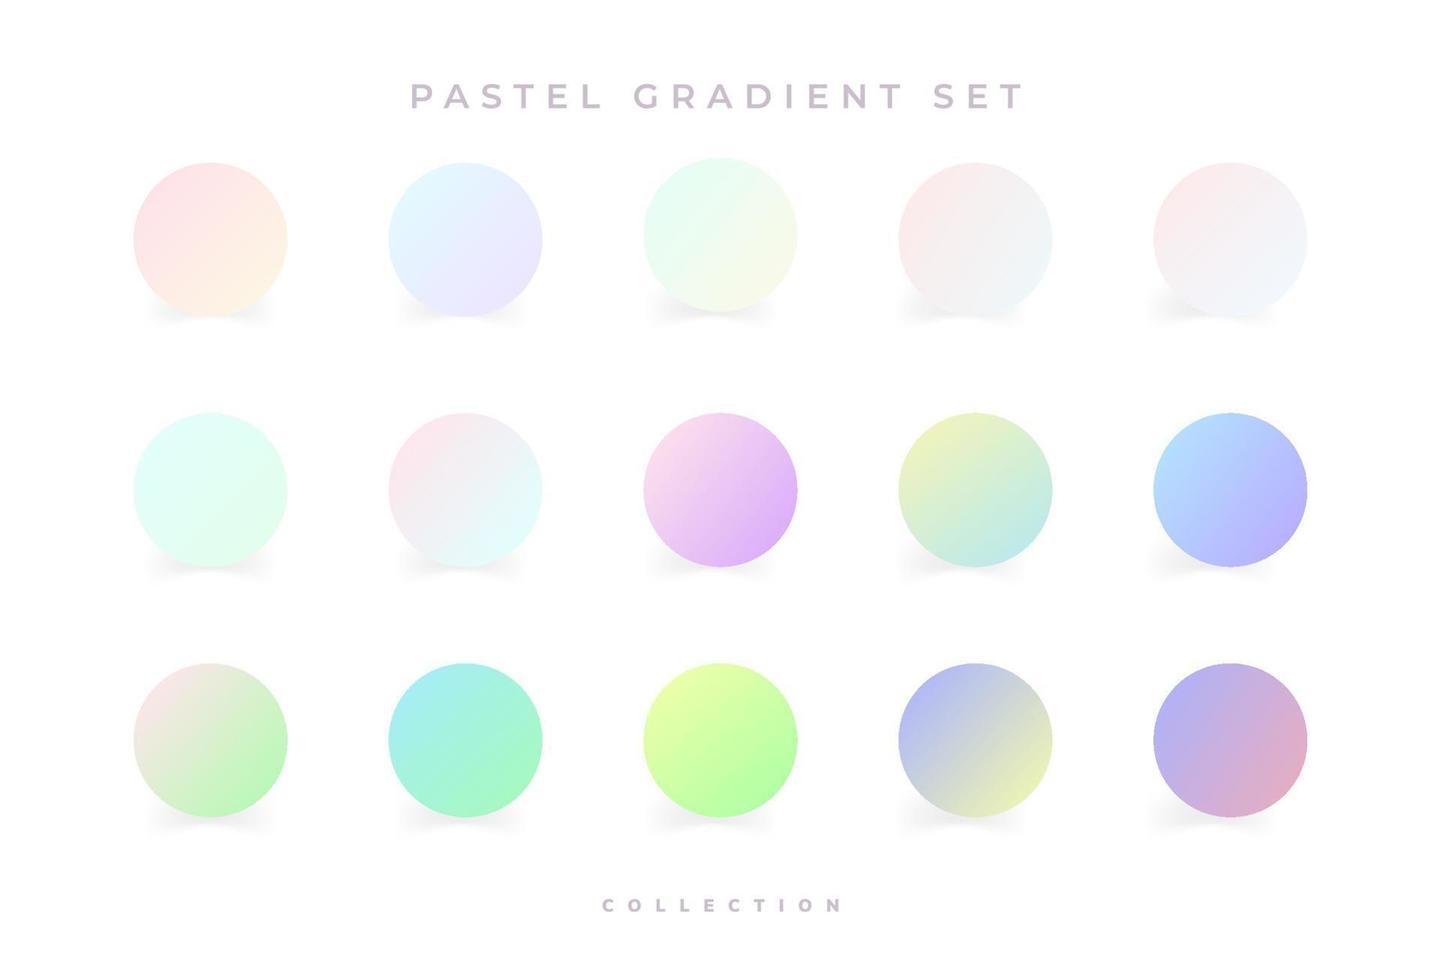 Collection of colorful smooth pastel gradient backgrounds for graphic design. Vector illustration